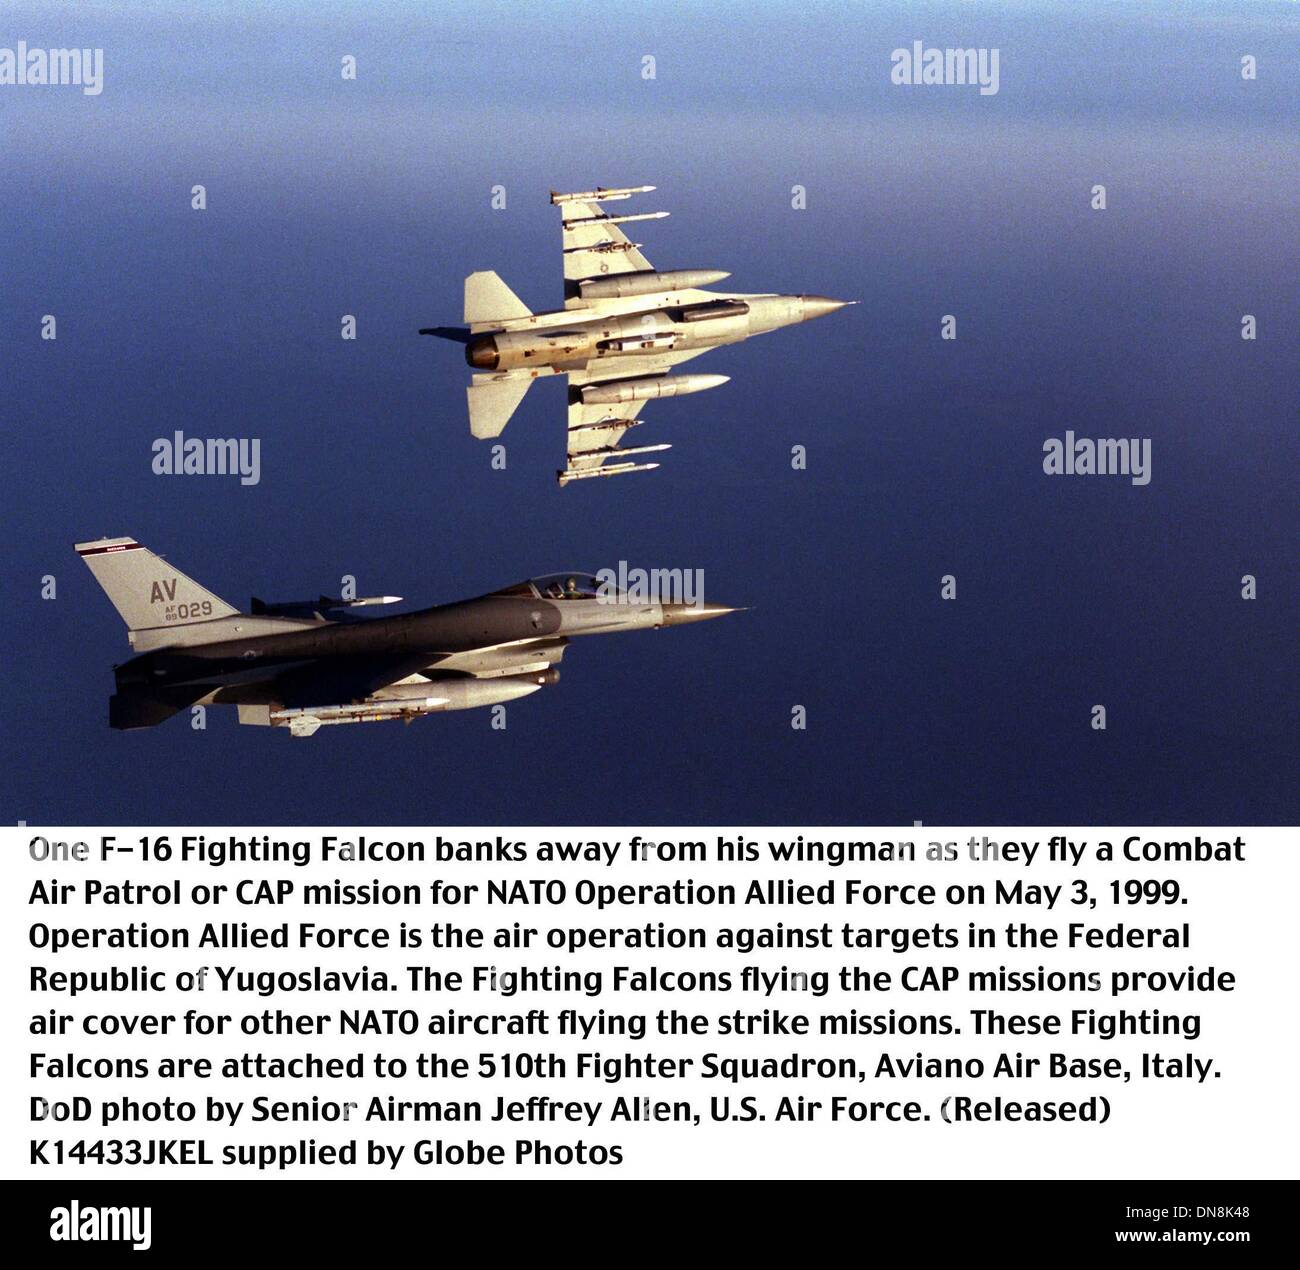 May 1, 1999 - Aviano Ab, Italy - K14433JKEL     05/03/99.990503-F-2171A-008..One F-16 Fighting Falcon banks away from his wingman as they fly a Combat Air Patrol or CAP mission for NATO Operation Allied Force on May 3, 1999.  Operation Allied Force is the air operation against targets in the Federal Republic of Yugoslavia.  The Fighting Falcons flying the CAP missions provide air c Stock Photo